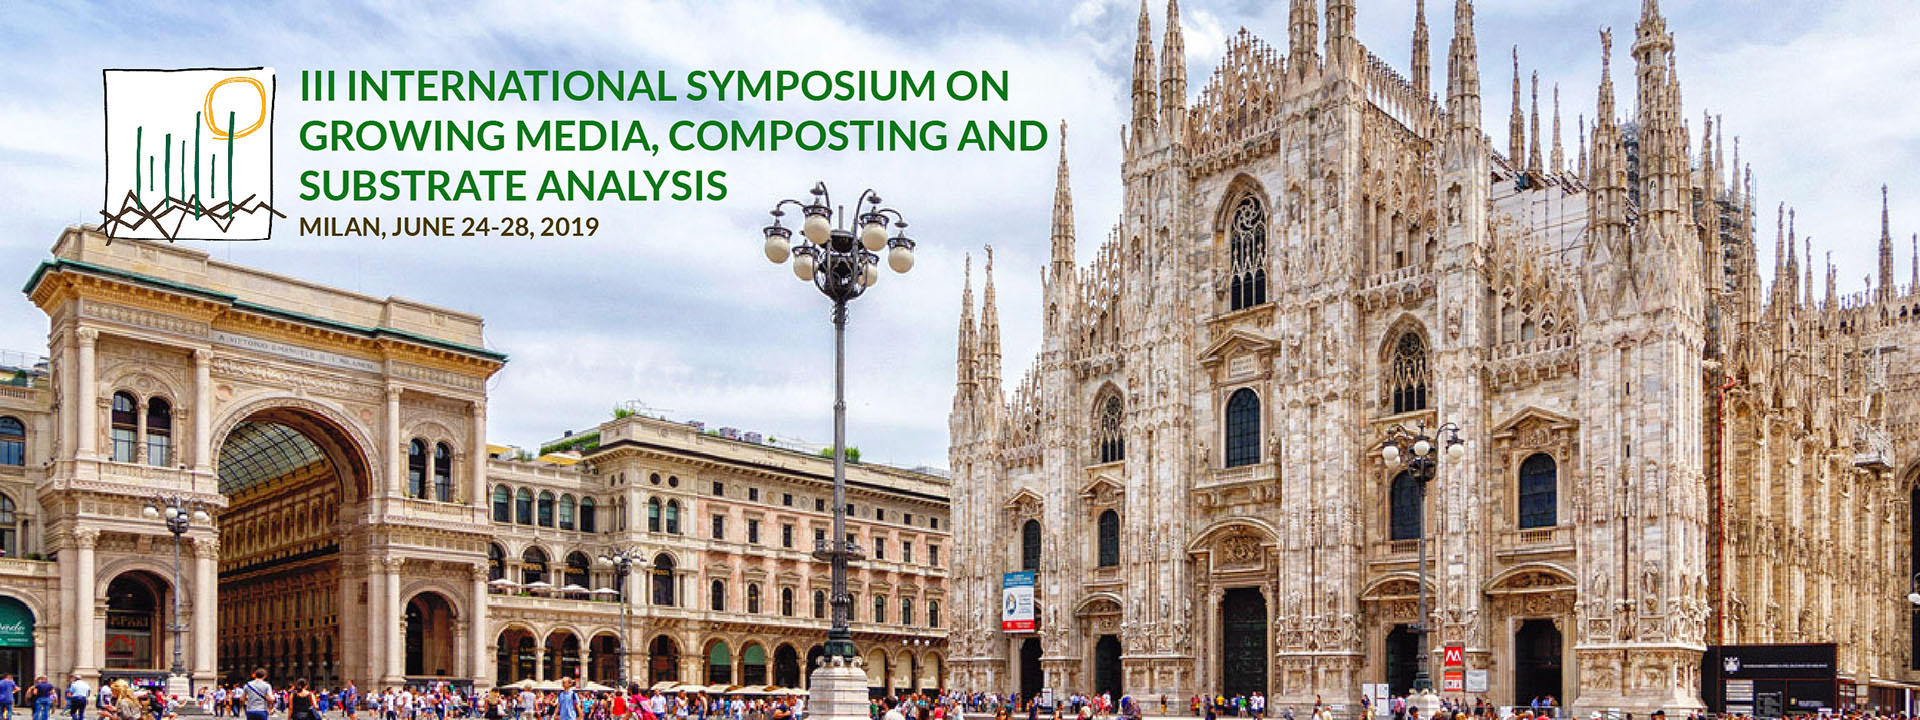 INTERNATIONAL SYMPOSIUM ON GROWING MEDIA, COMPOSTING AND SUBSTRATE ANALYSIS